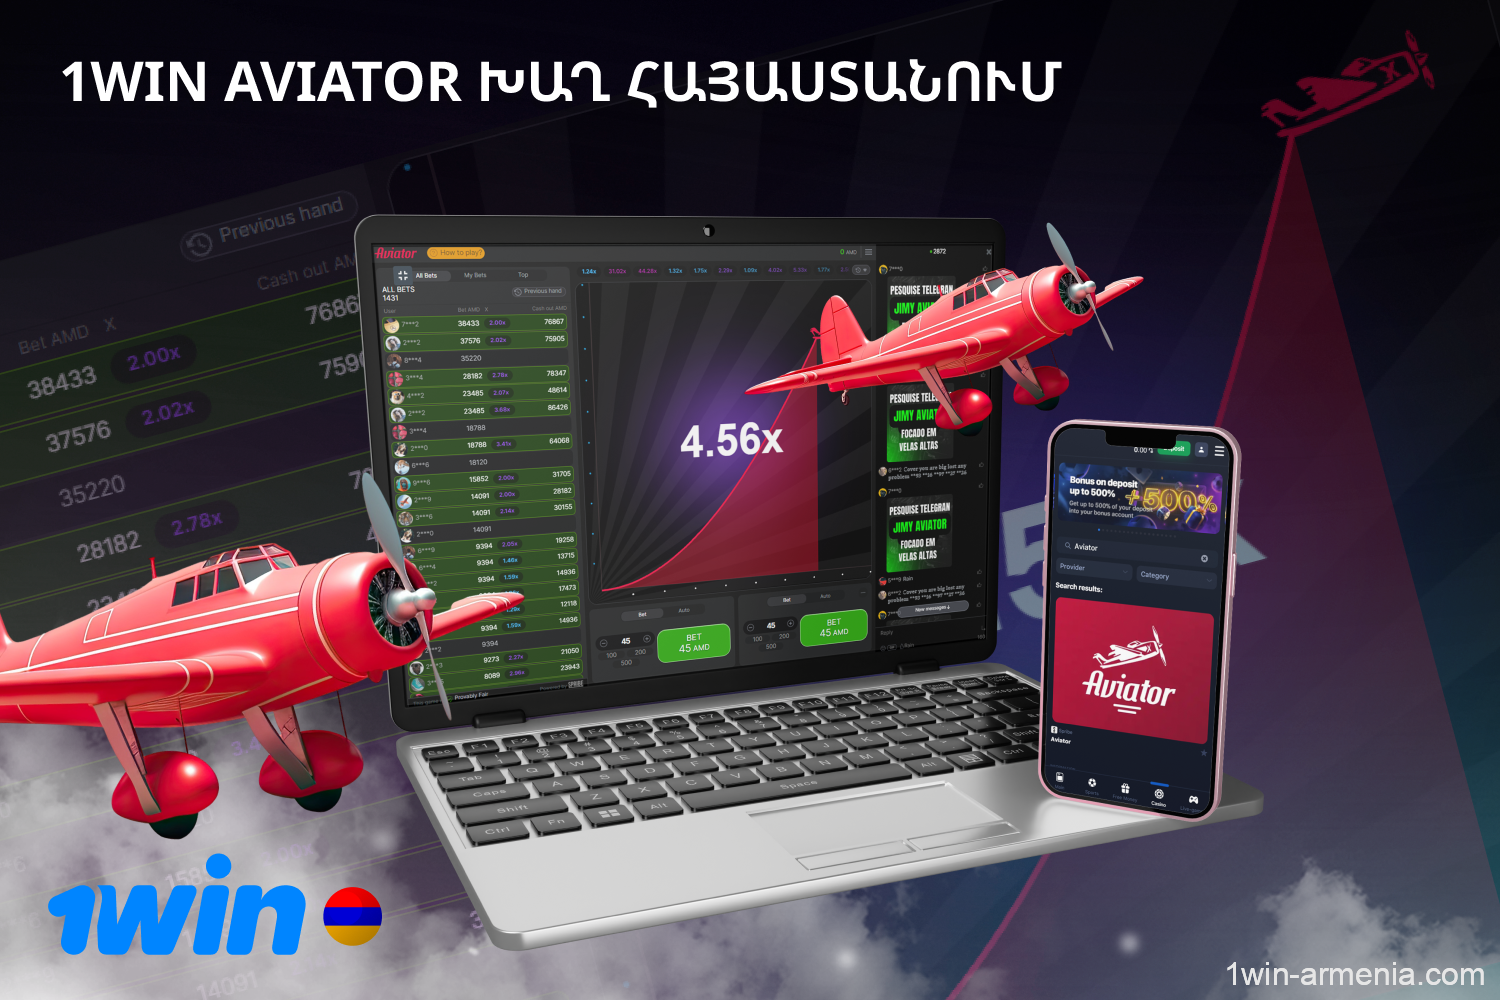 The popular Aviator 1win crash game is available for players in Armenia on both desktop and mobile devices